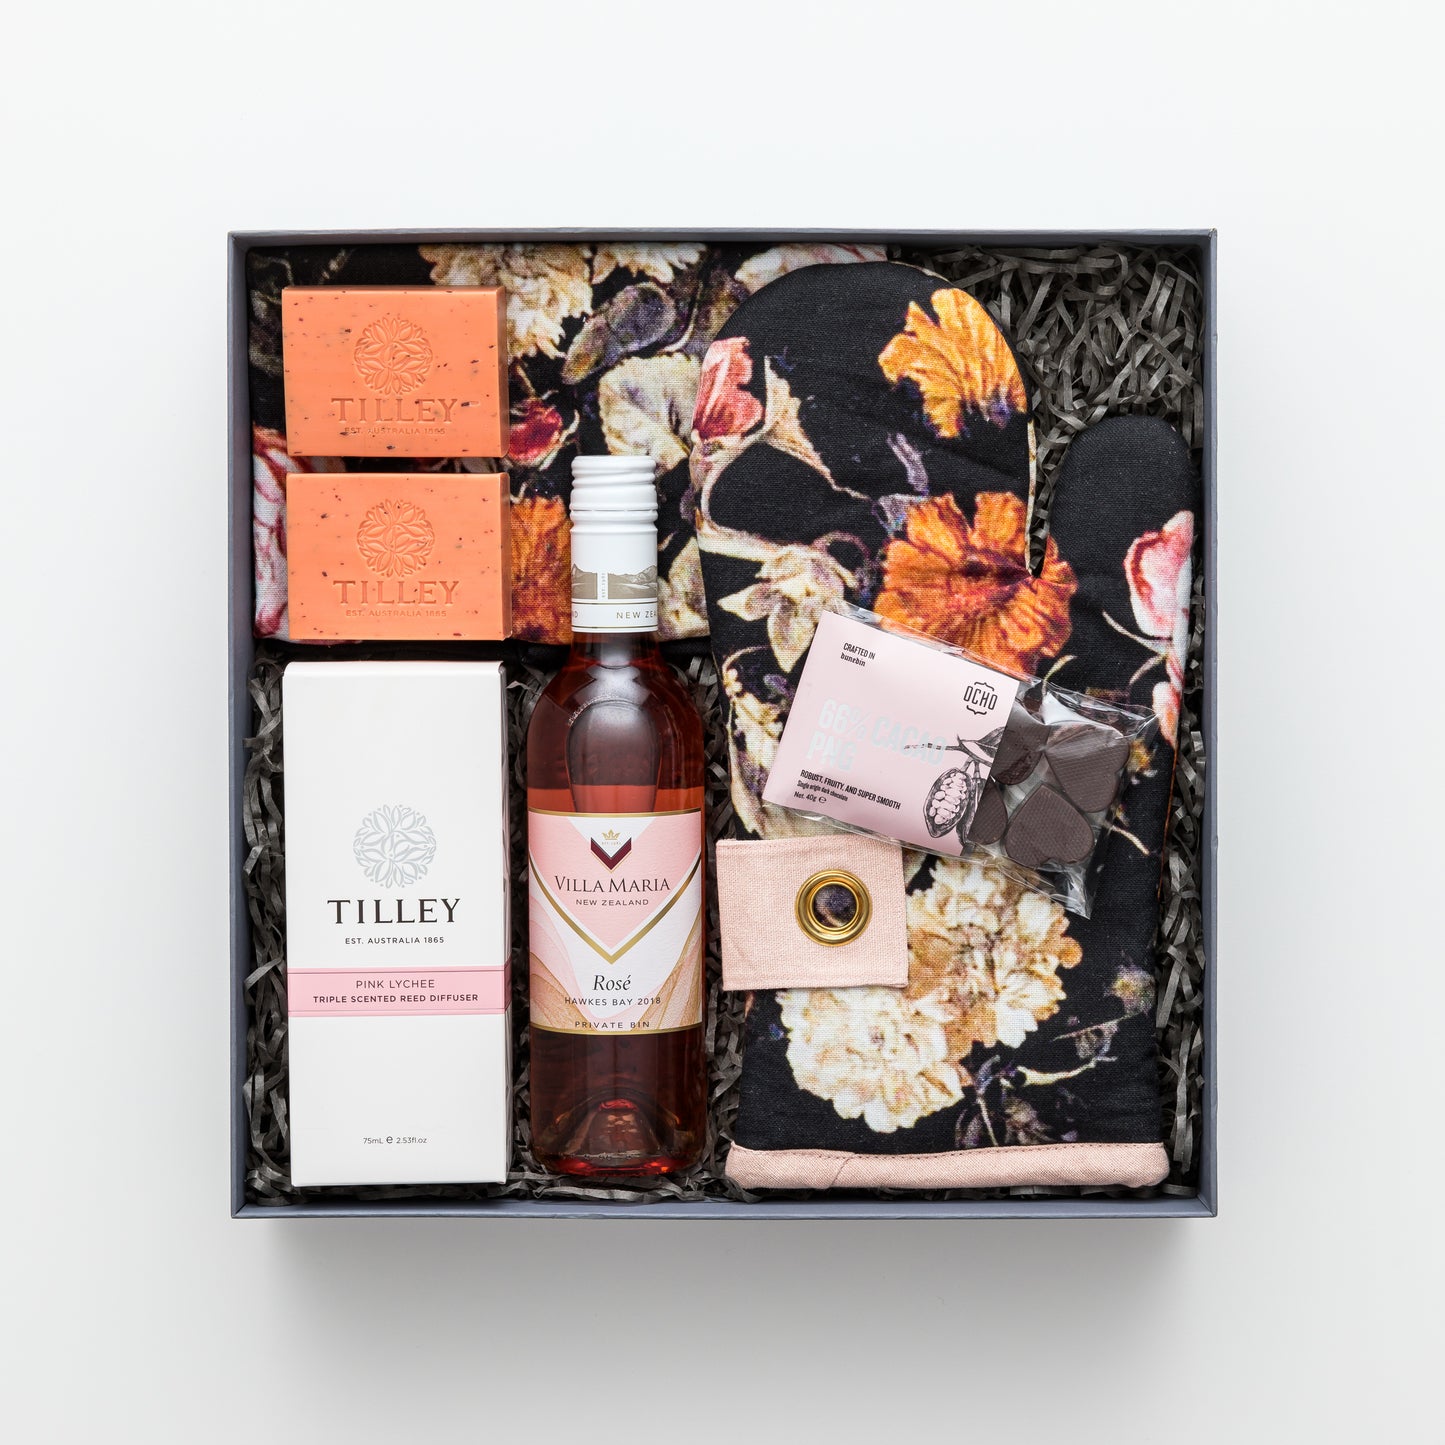 Gift box includes rose wine, chocolate, oven mitt, tea towel, diffuser, two soaps.